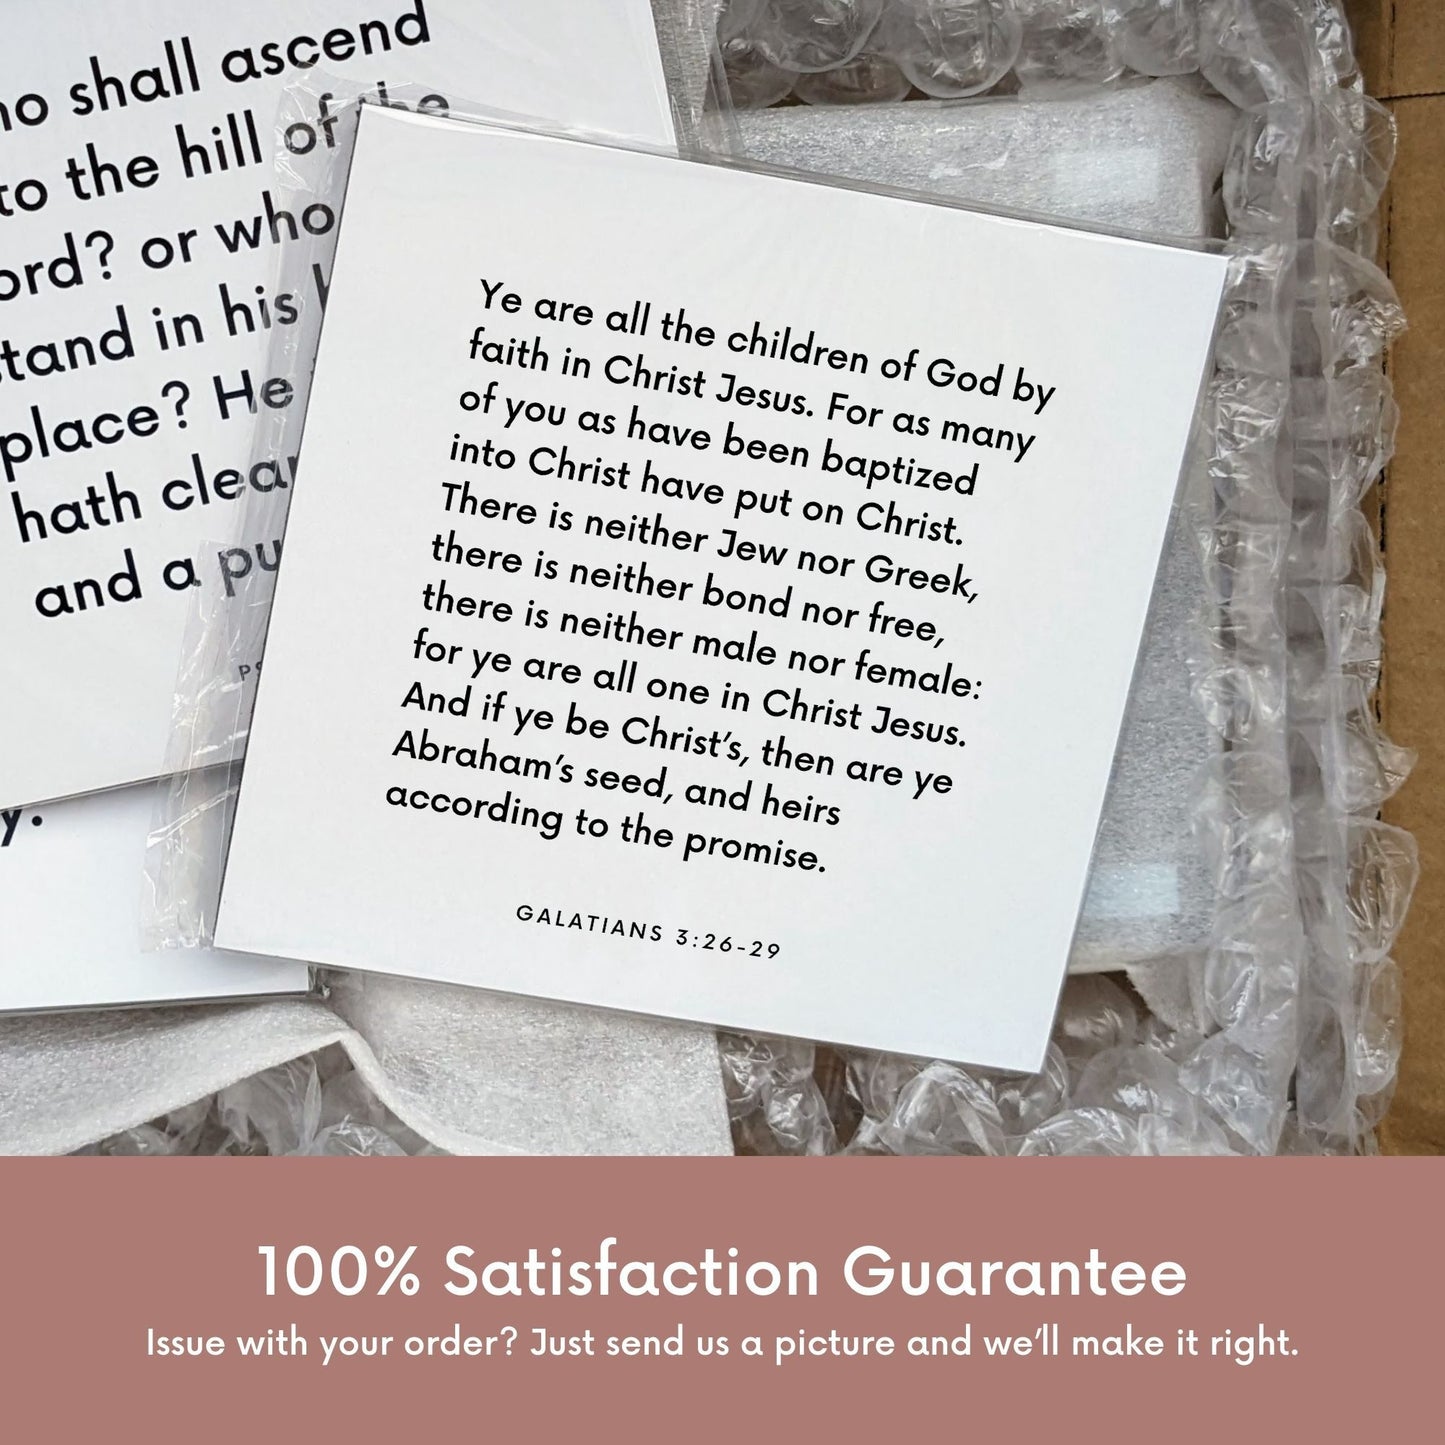 Shipping materials for scripture tile of Galatians 3:26-29 - "Ye are all one in Christ Jesus"